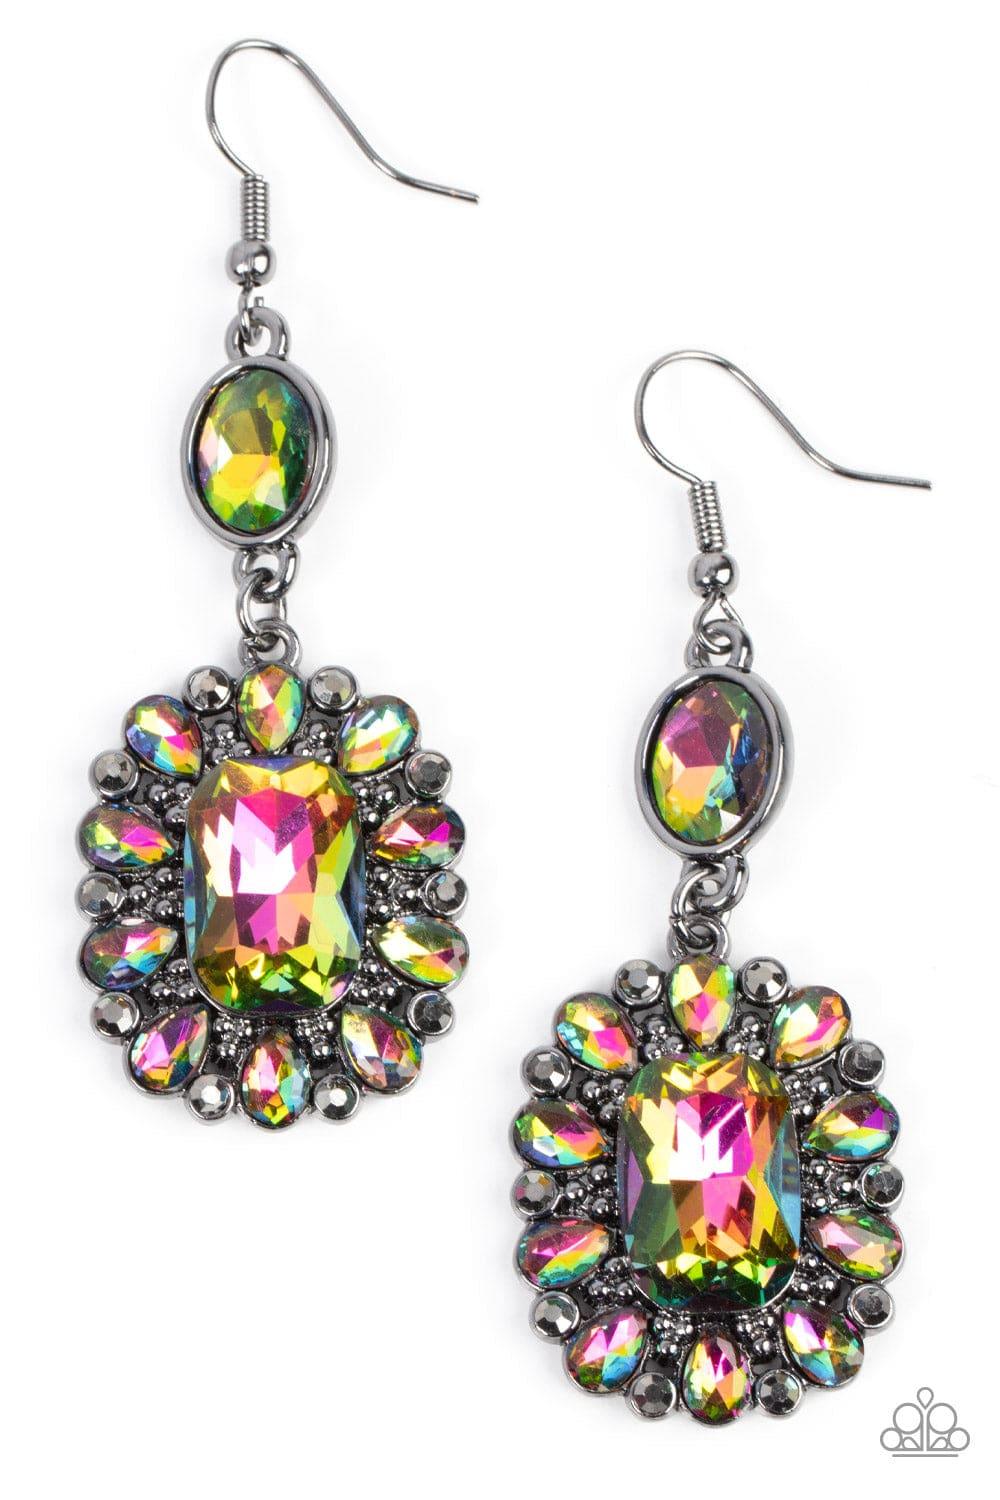 Paparazzi Accessories - Capriciously Cosmopolitan - Multicolor Oil-spill Earrings - Bling by JessieK